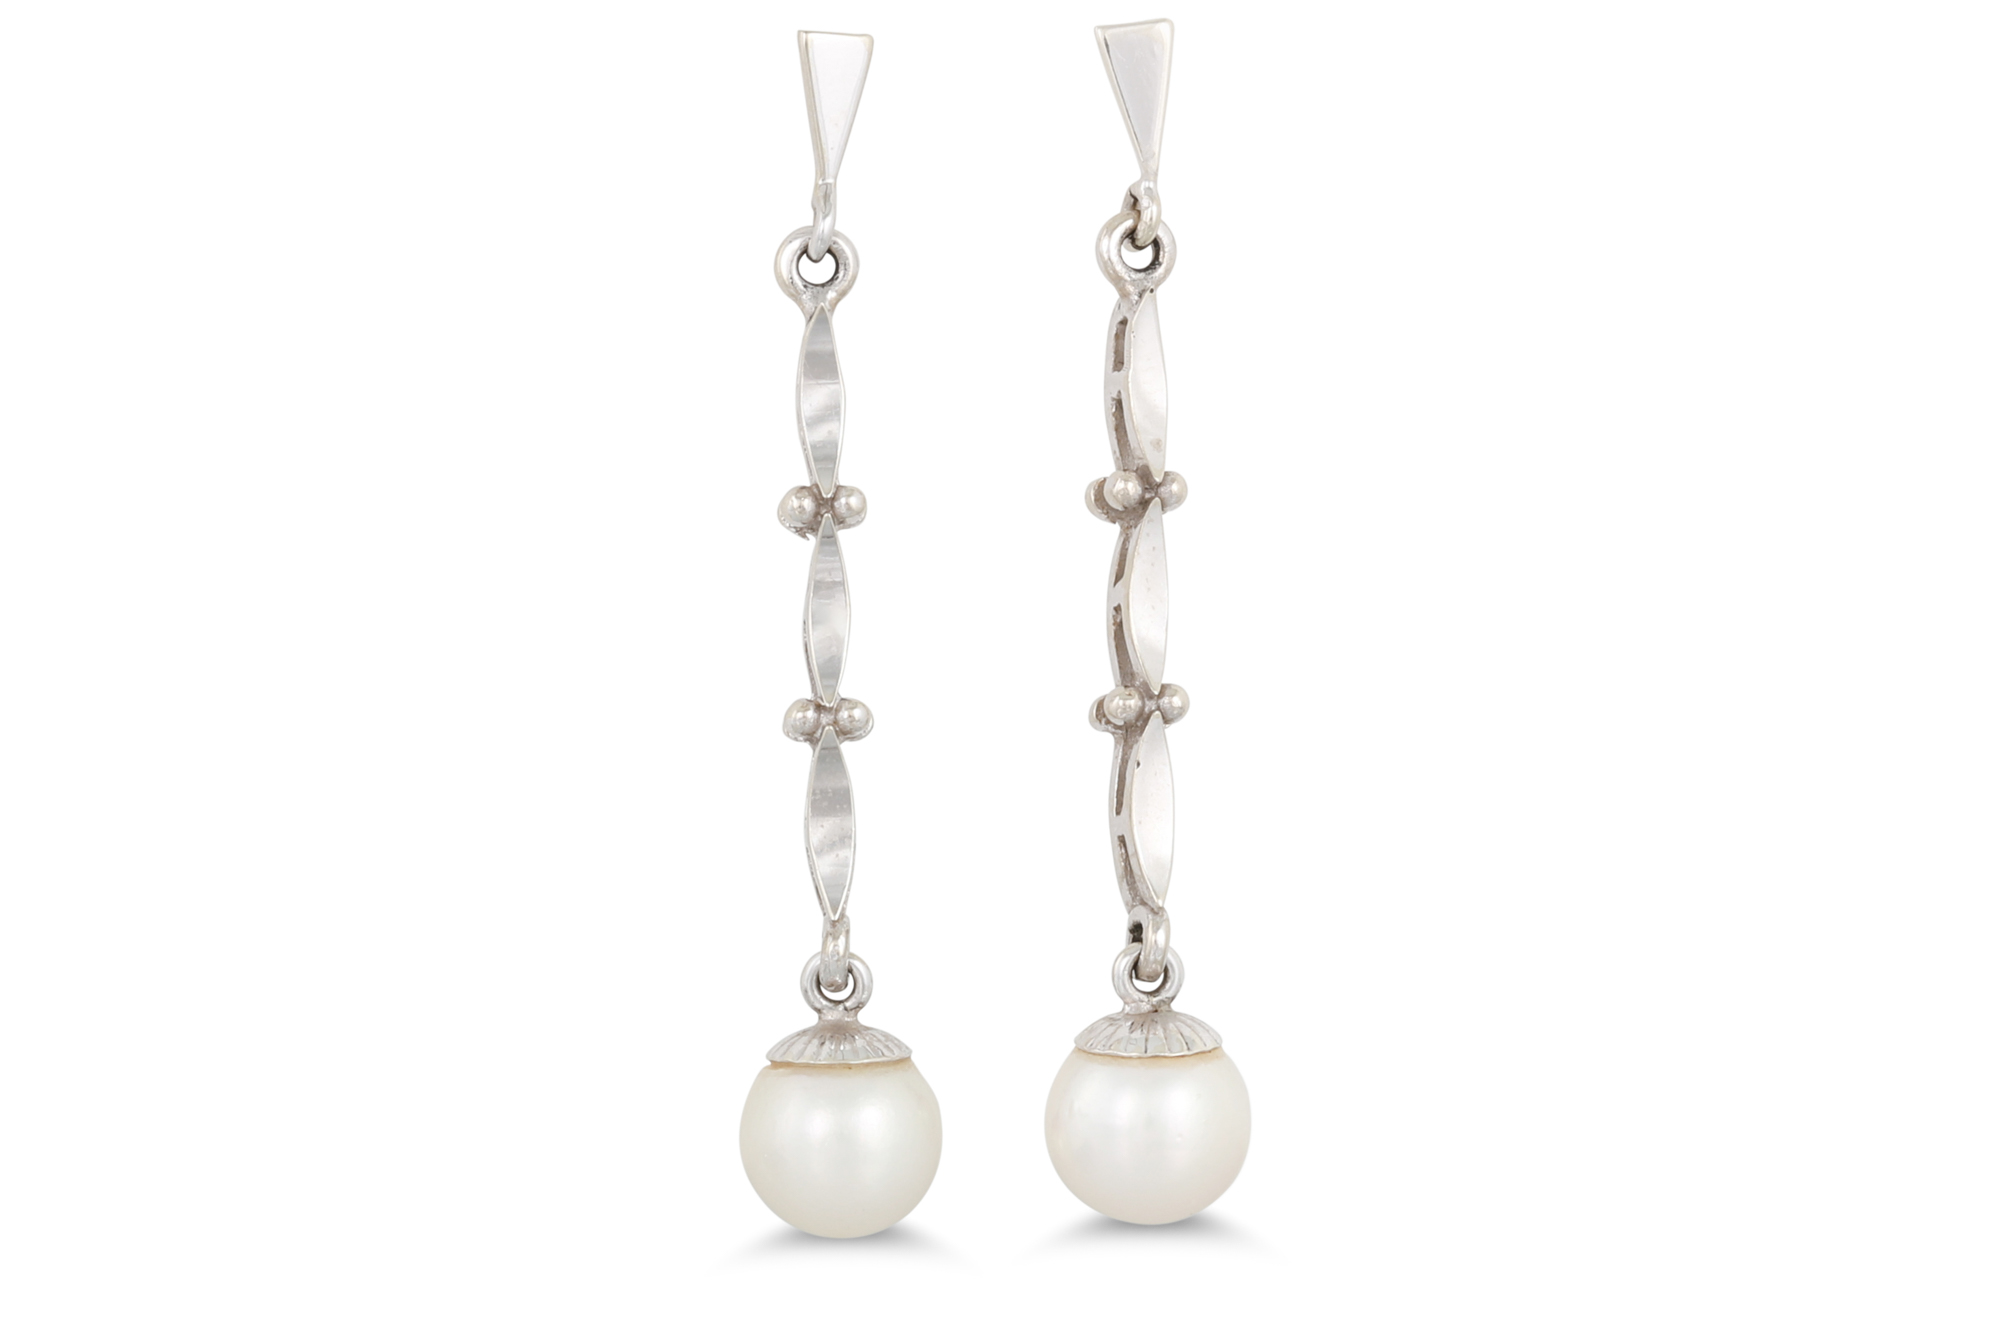 A PAIR OF PEARL DROP EARRINGS, mounted in 14ct white gold